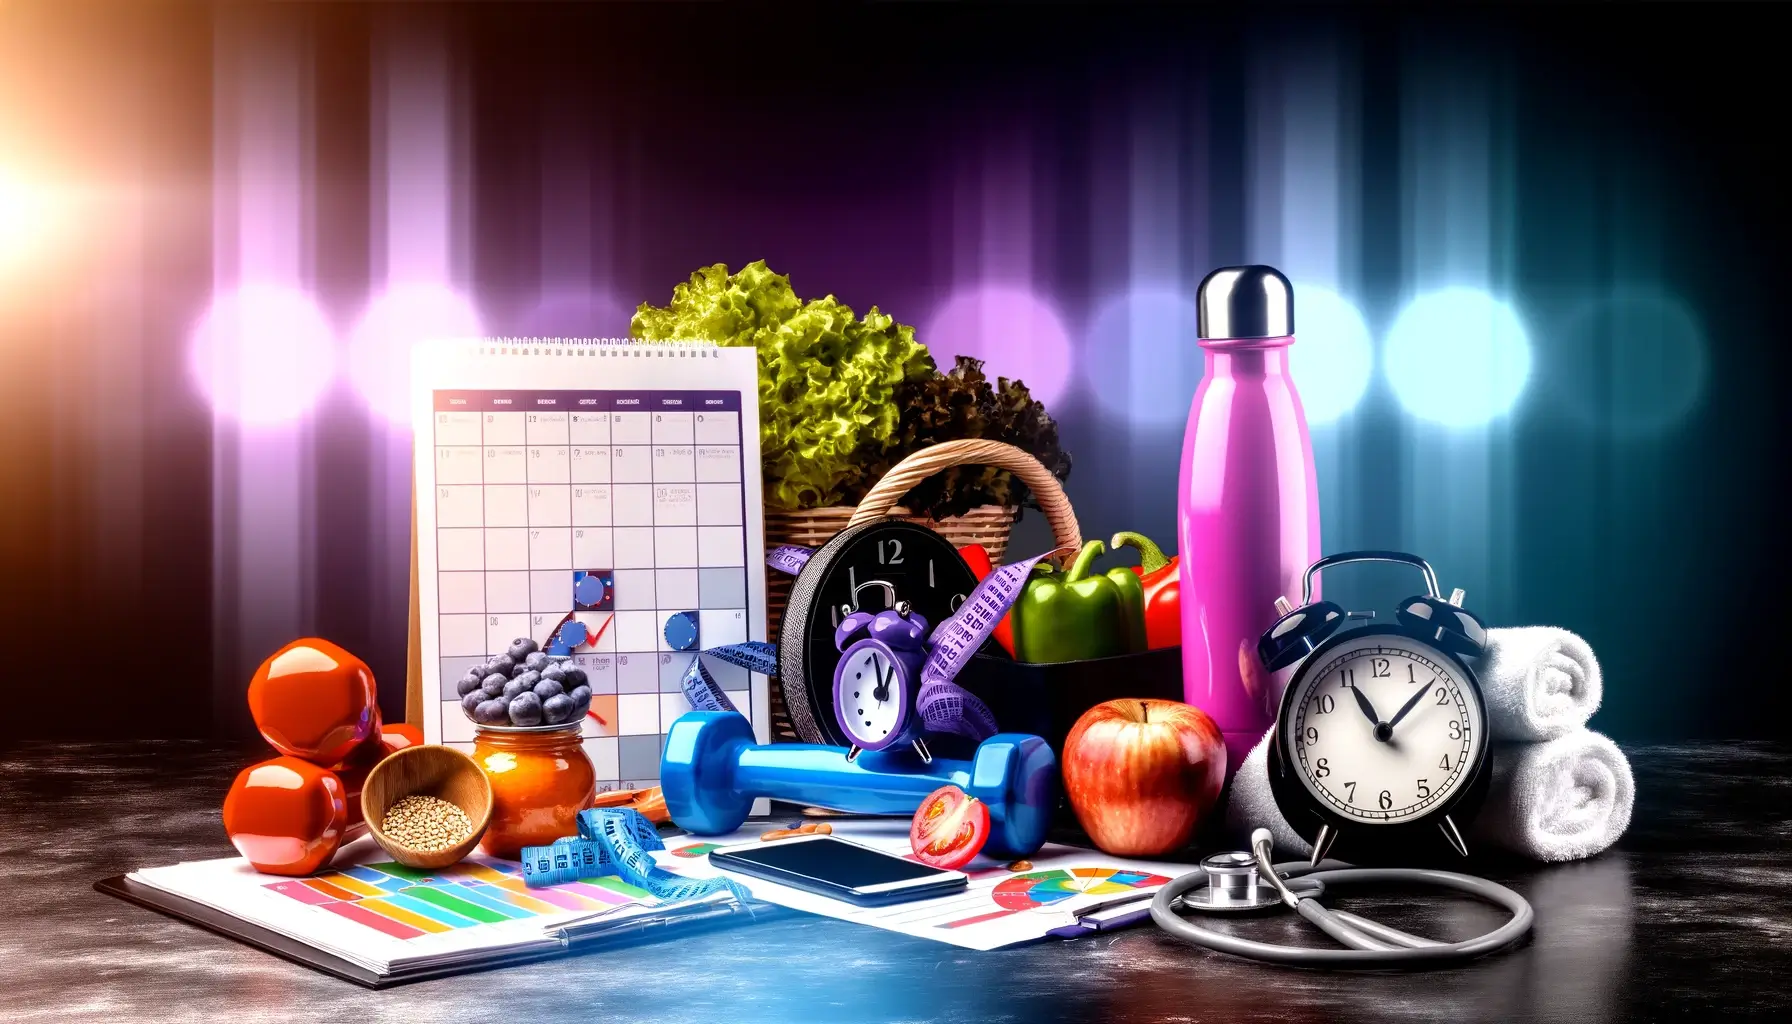 A carefully arranged collection of health and fitness items including dumbbells, fresh produce, a water bottle, measuring tape, alarm clock, and a calendar with graphs, symbolizing a balanced approach to a busy lifestyle.